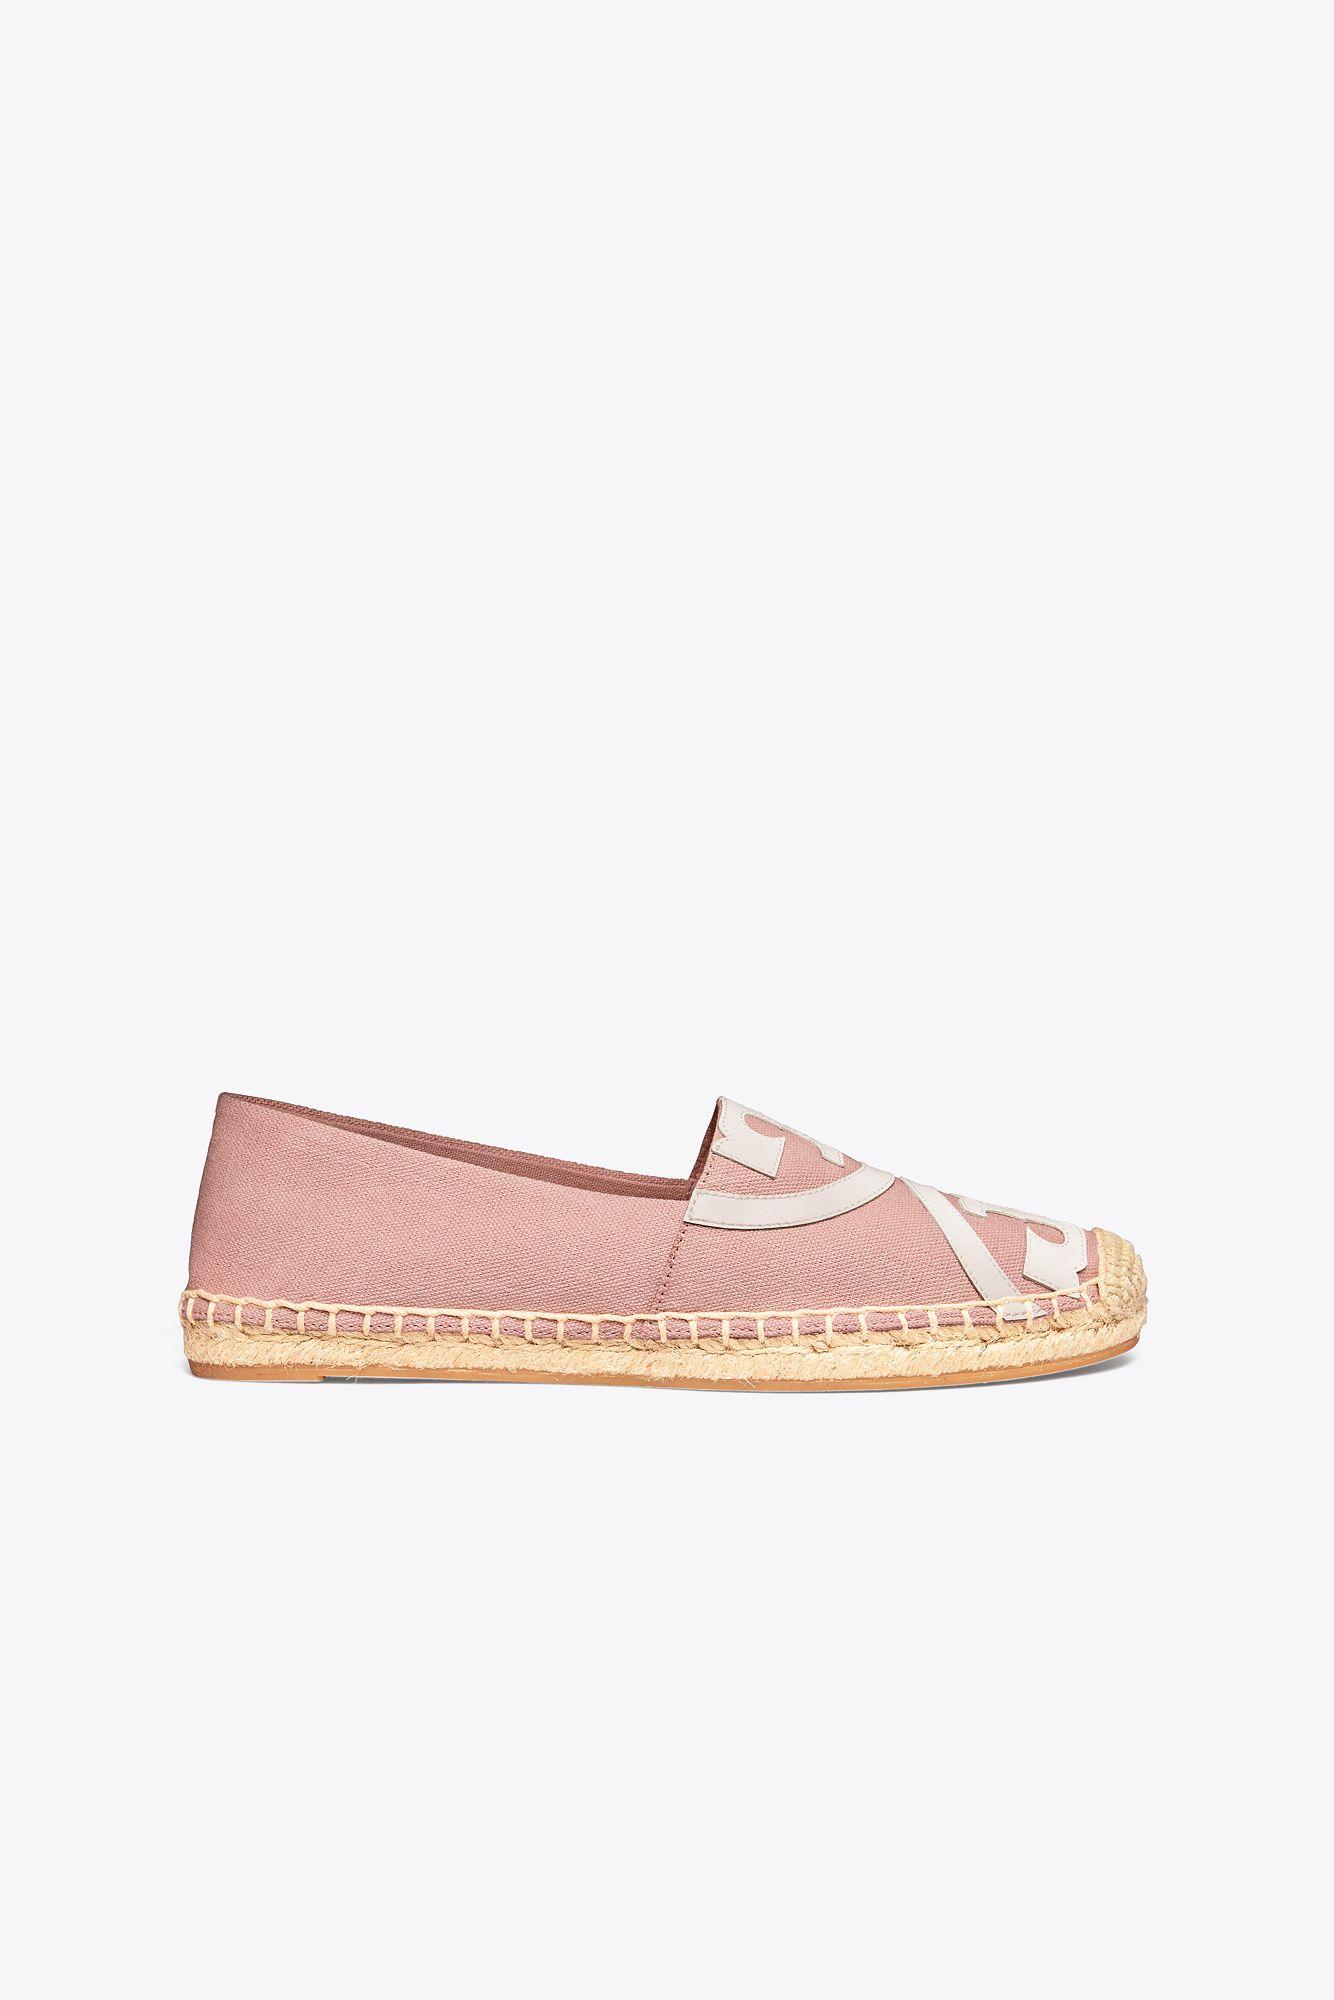 Tory Burch Poppy Canvas & Patent Espadrilles in Pink | Lyst